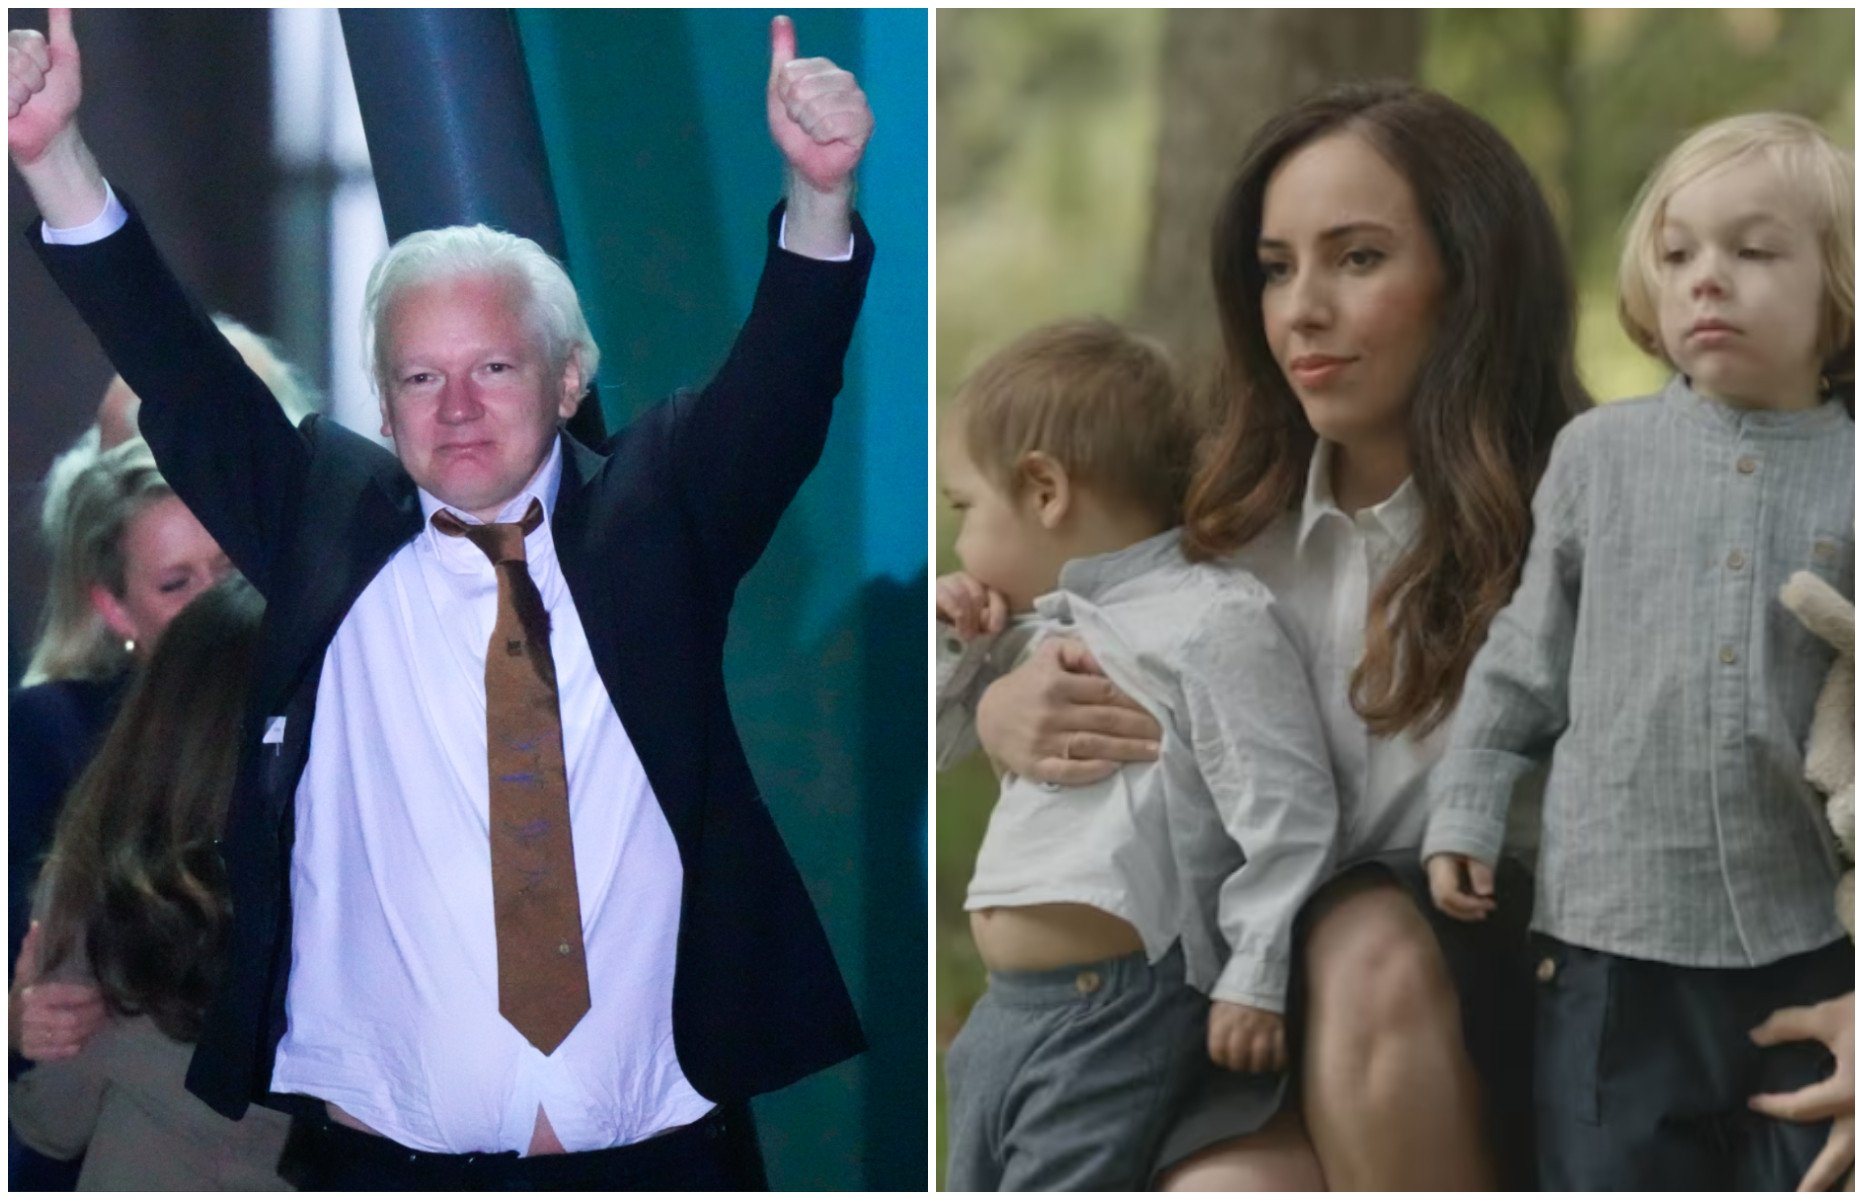 Julian Assange is finally free to reunite with his wife Stella and two young children, Gabriel and Max. Photos: AP, @MoreBirths/X